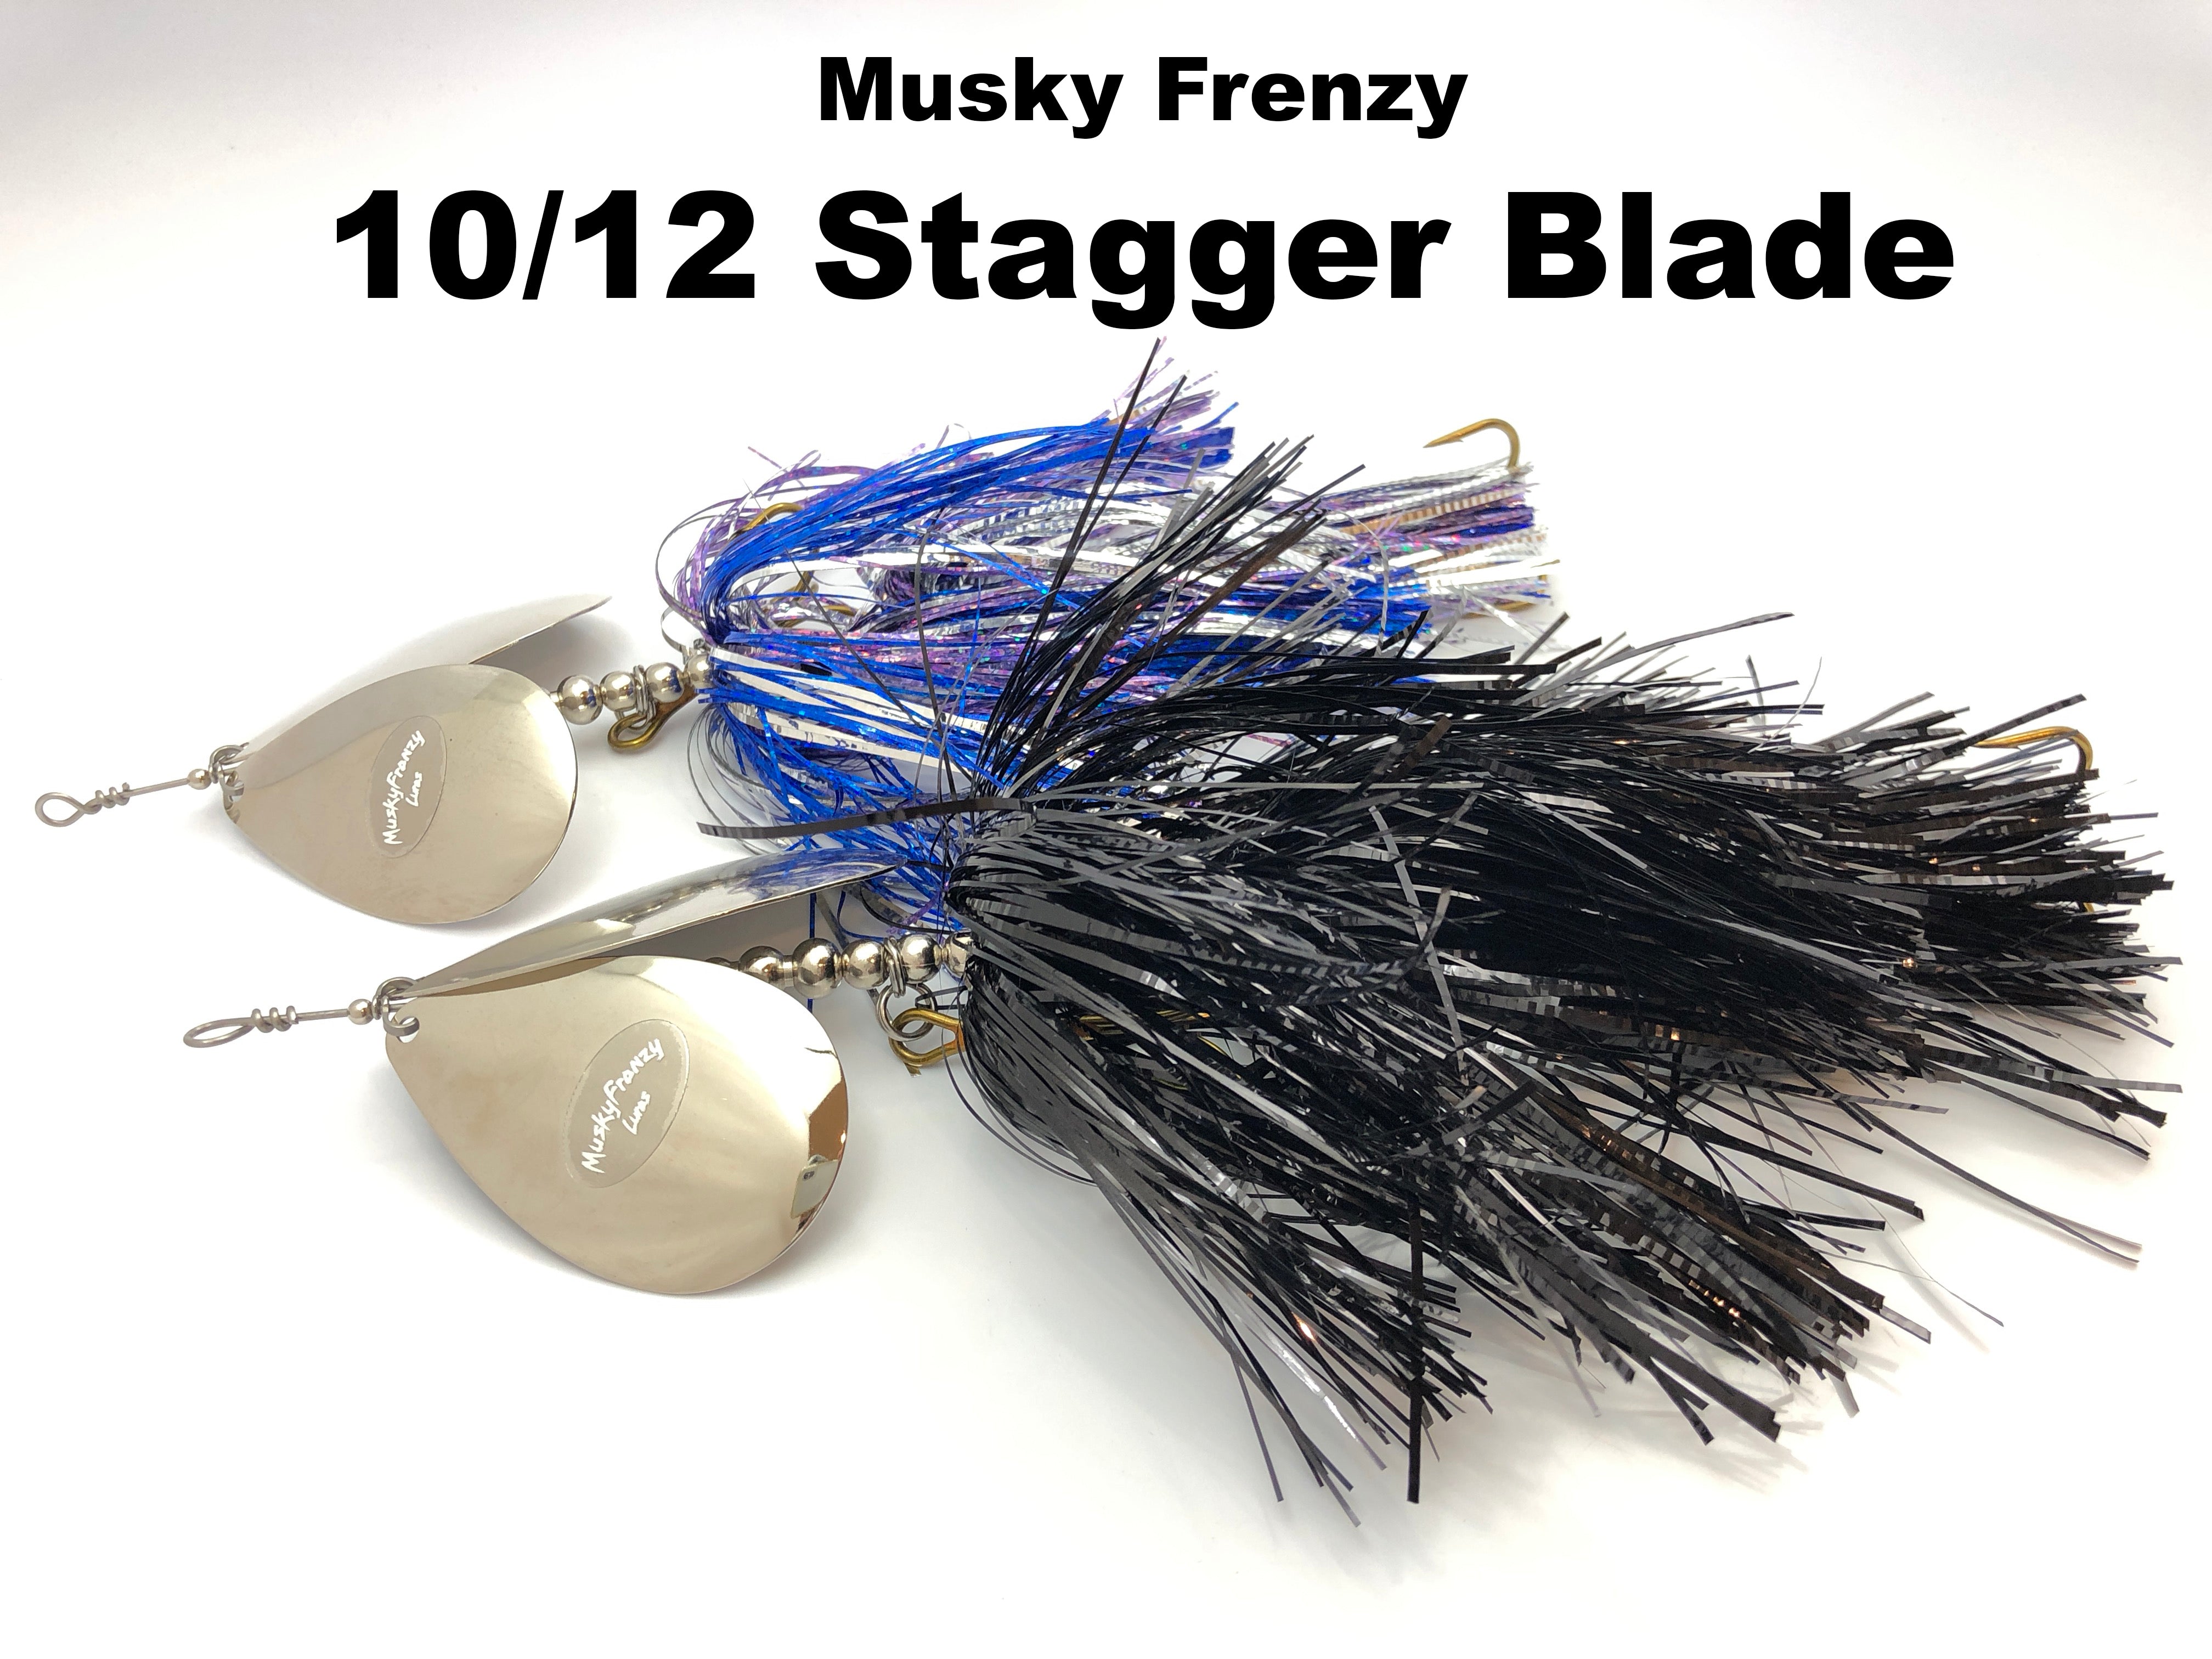 Musky Frenzy Lures 10/12 Stagger Blade – Team Rhino Outdoors LLC